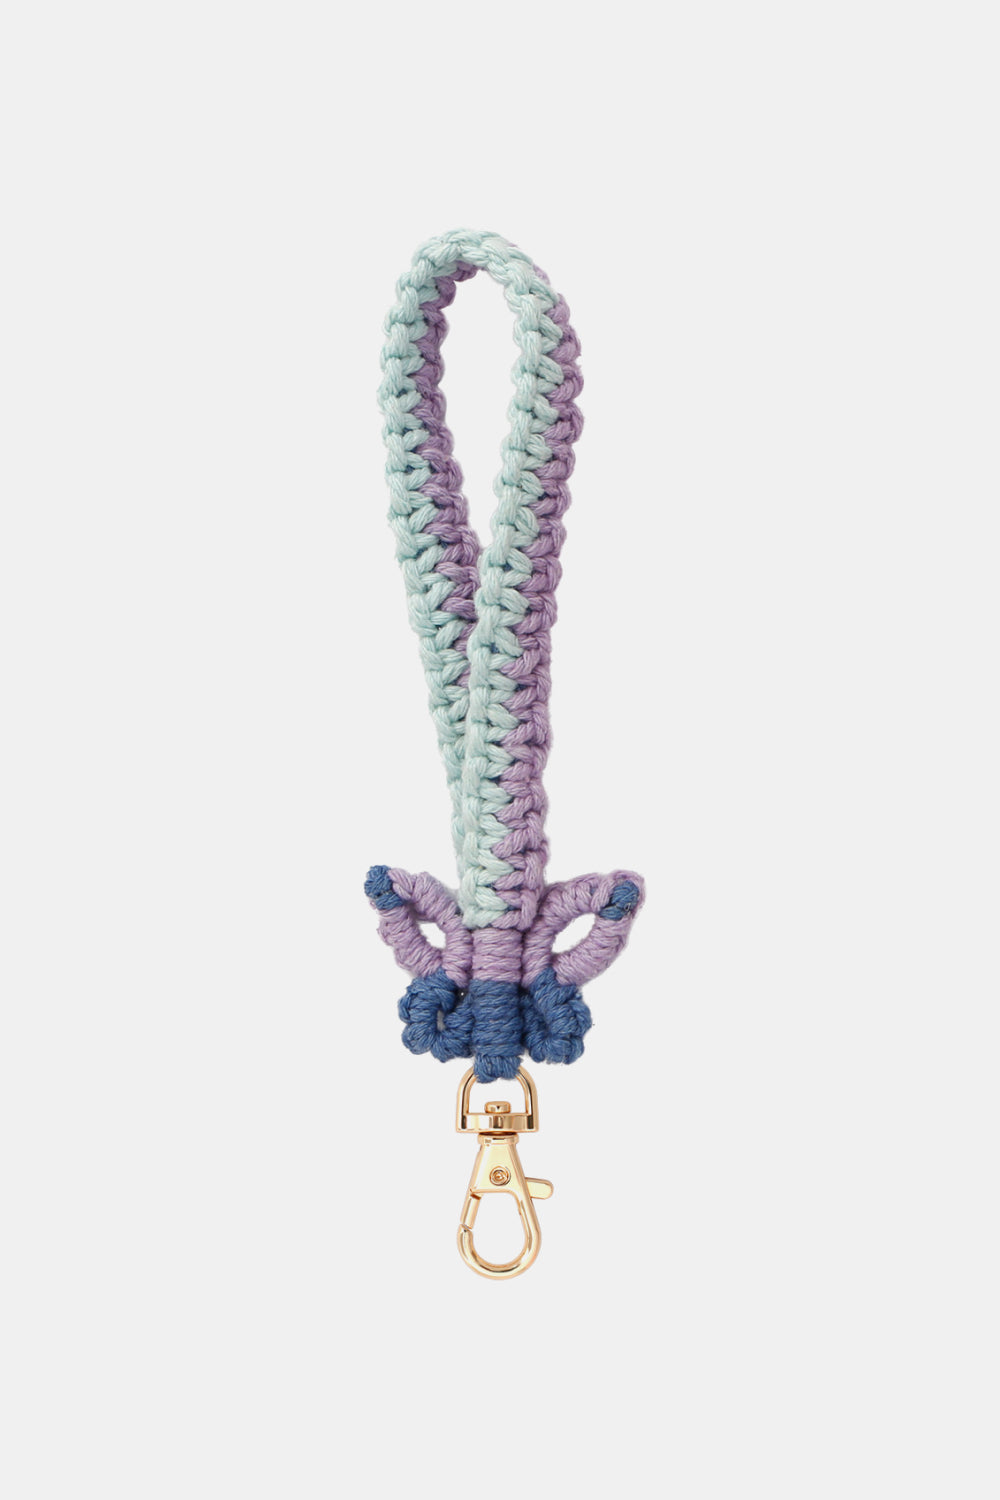 Trendsi Cupid Beauty Supplies Lavender / One Size Keychains Butterfly Shape Macrame Key Chain